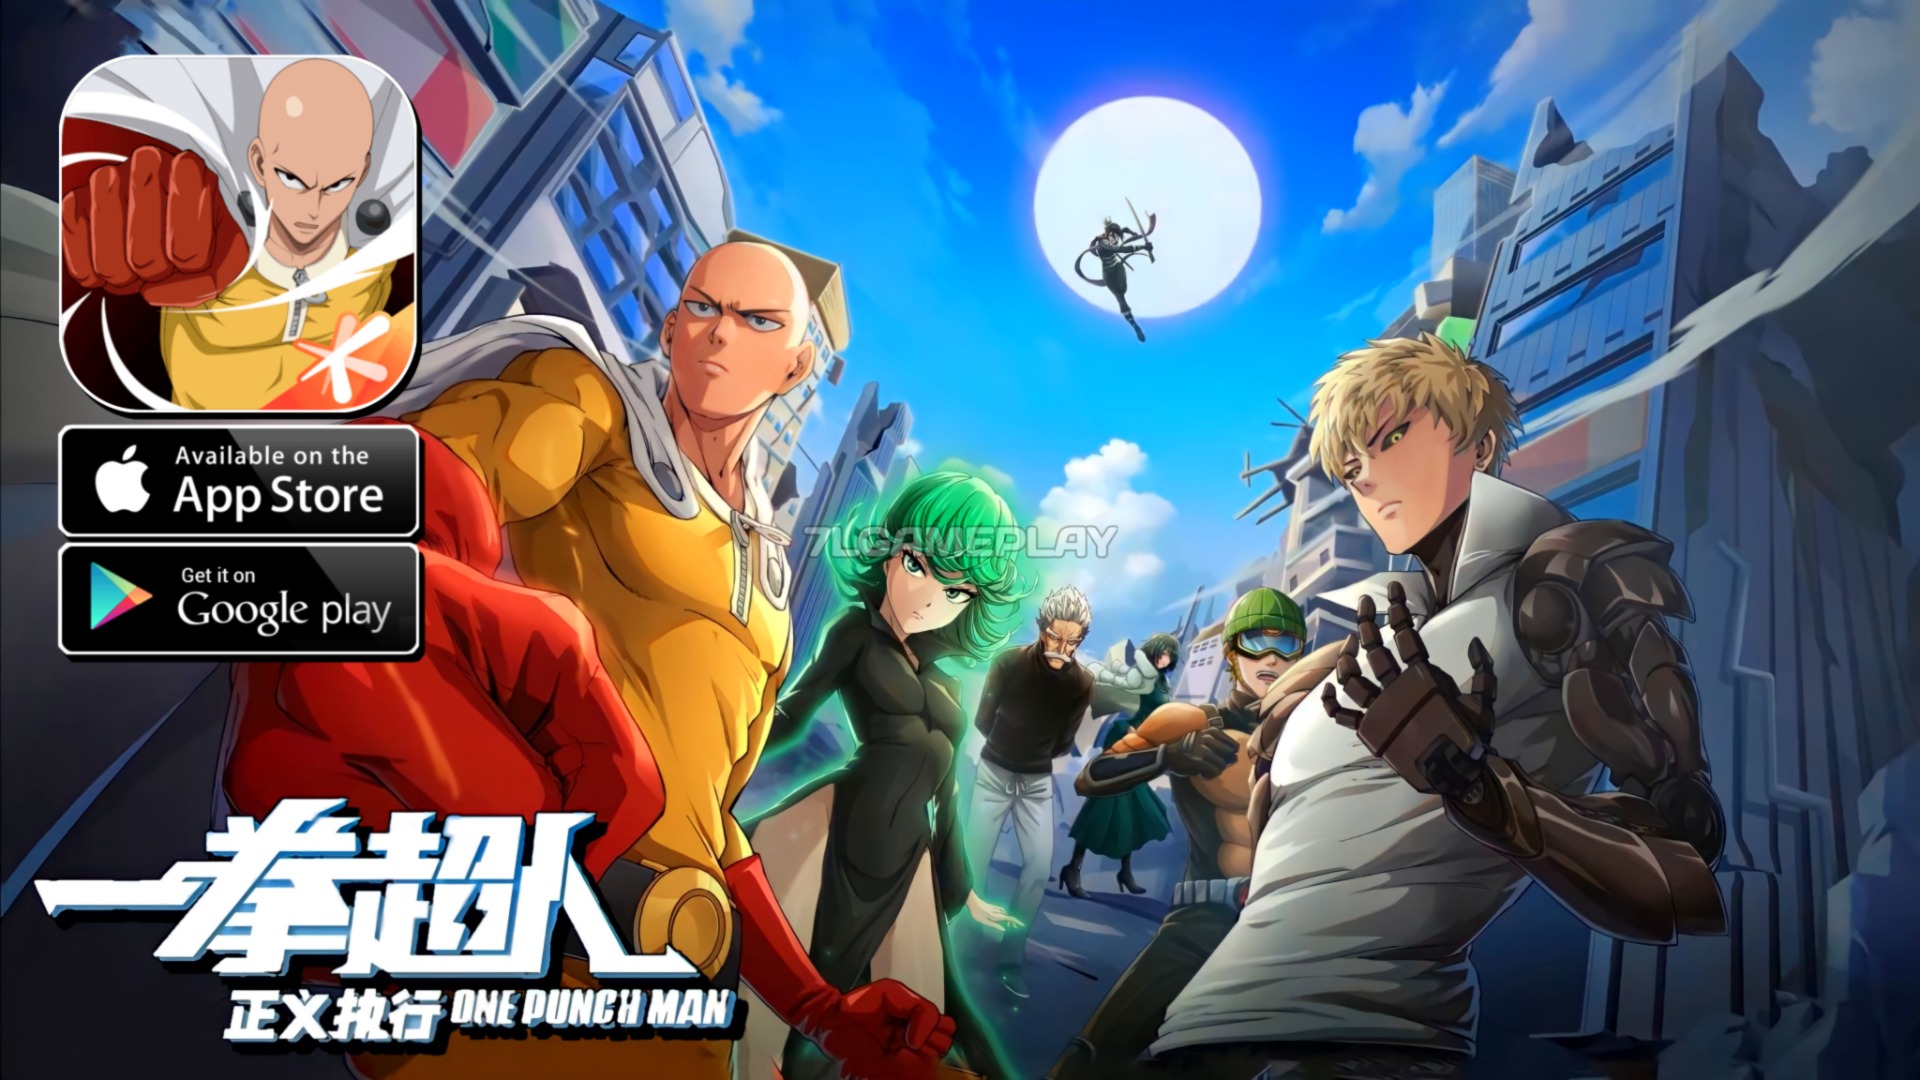 One Punch Man Wallpapers - Apps on Google Play